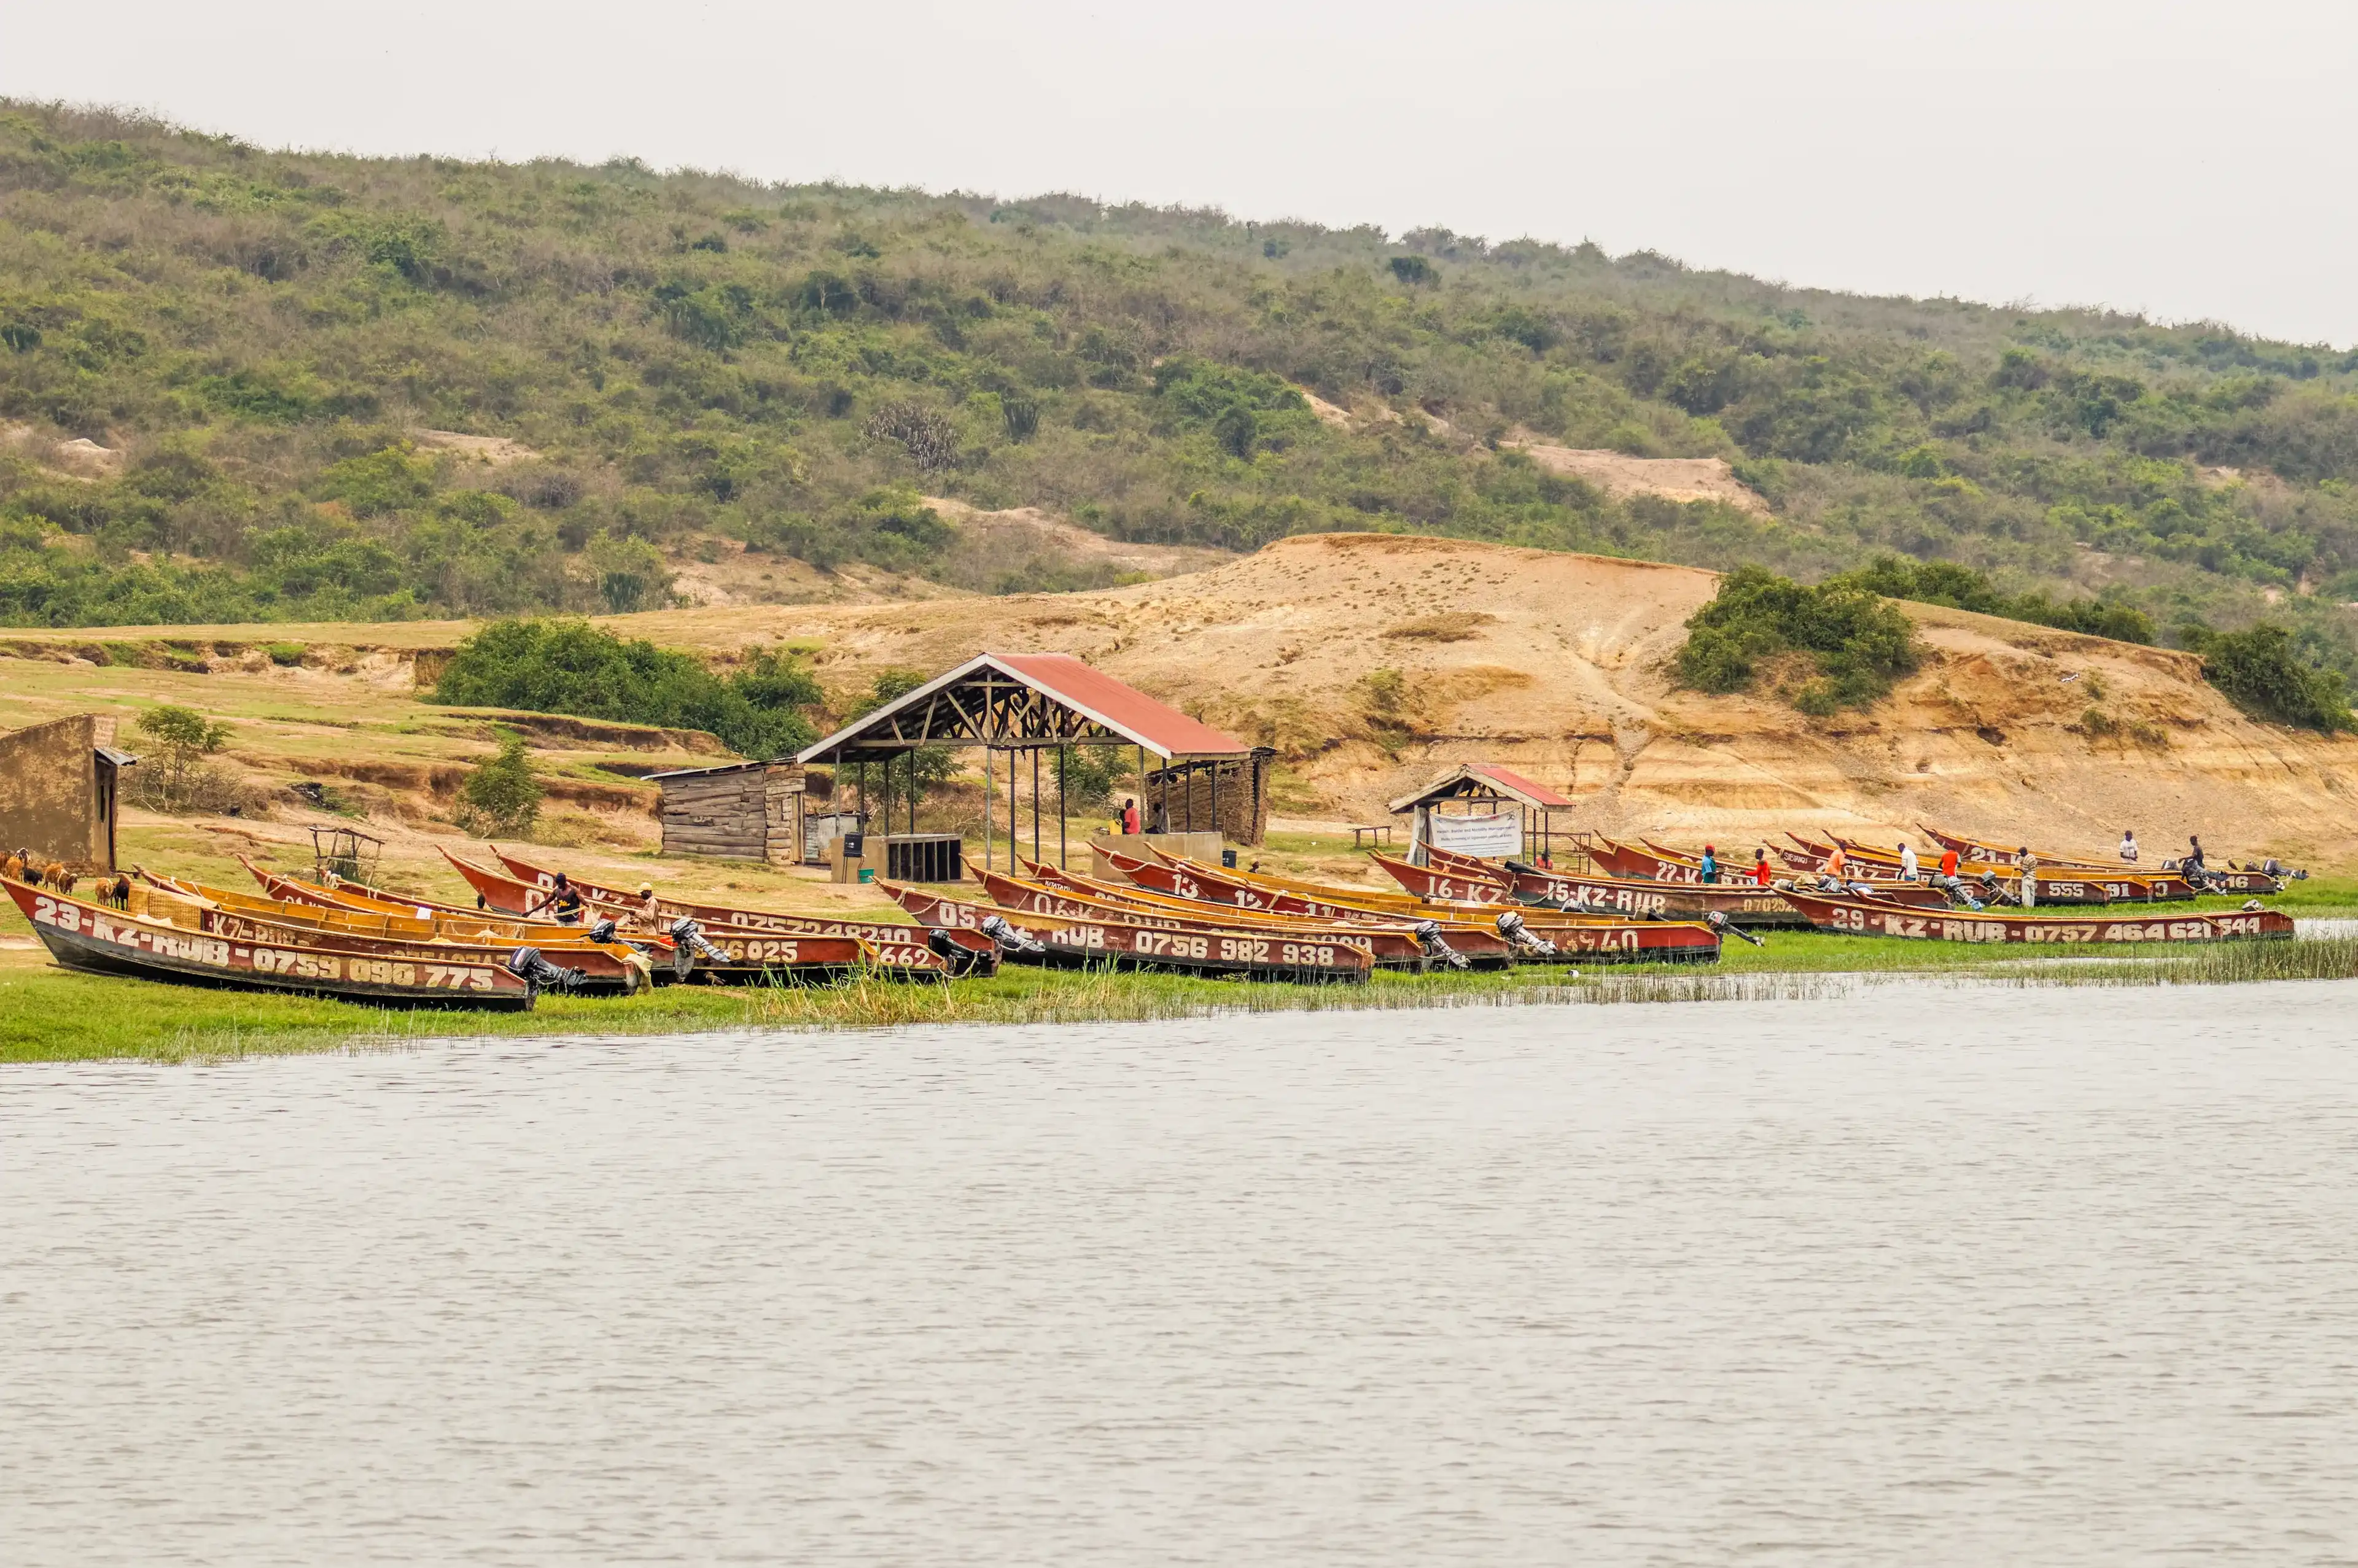 Kazinga Channel / Uganda - february 28 2020: Fishing boats shown on the Kazinga channel shore. The Kazinga channel is the only source of transportation in this region of central Africa.